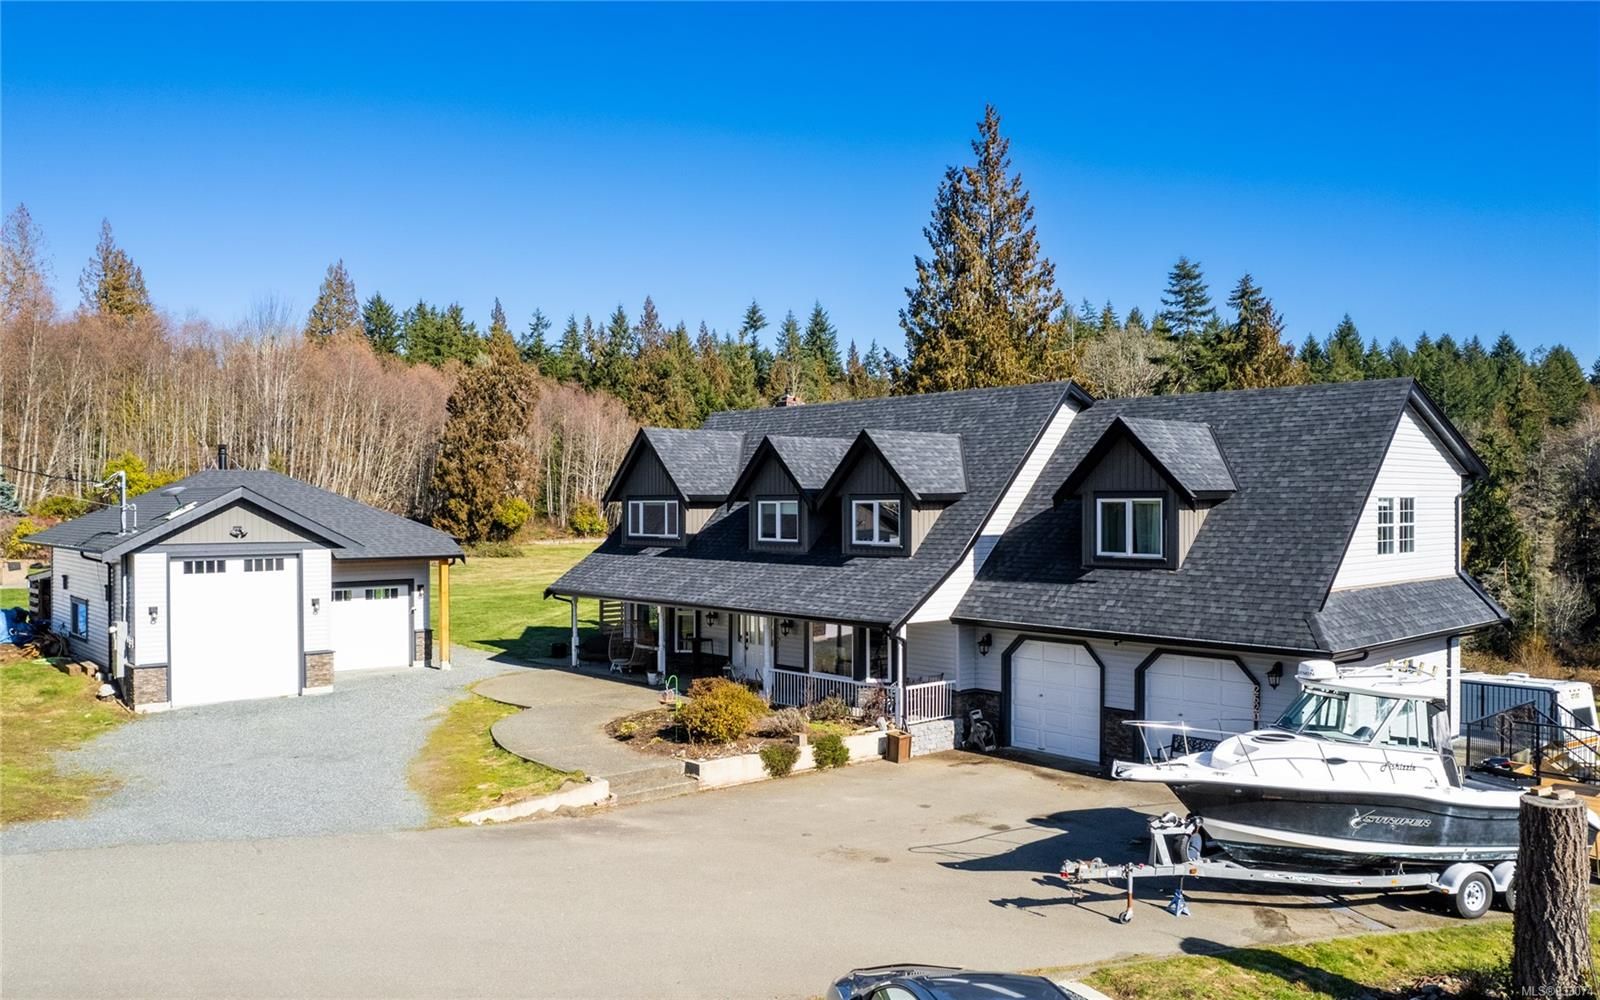 New property listed in PQ Nanoose, Parksville/Qualicum